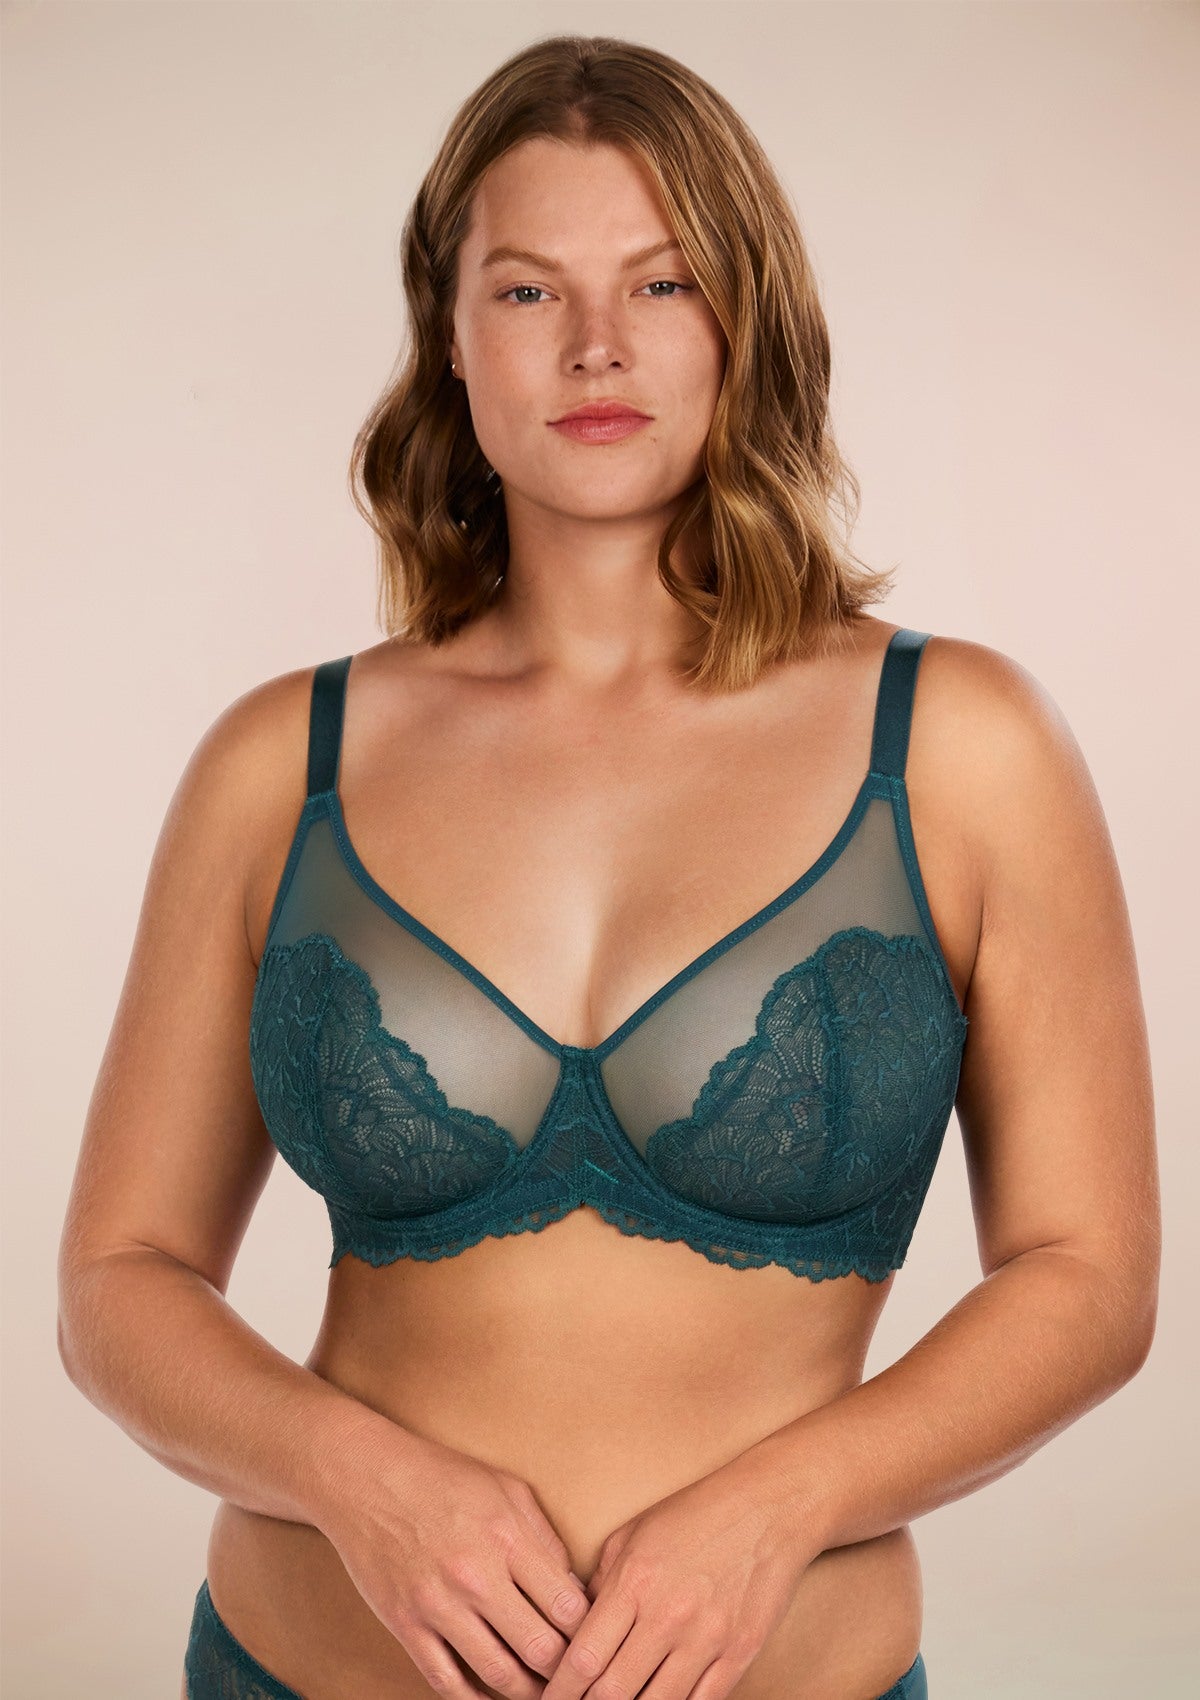 HSIA Blossom Full Figure See-Through Lace Bra For Side And Back Fat - Balsam Blue / 36 / G